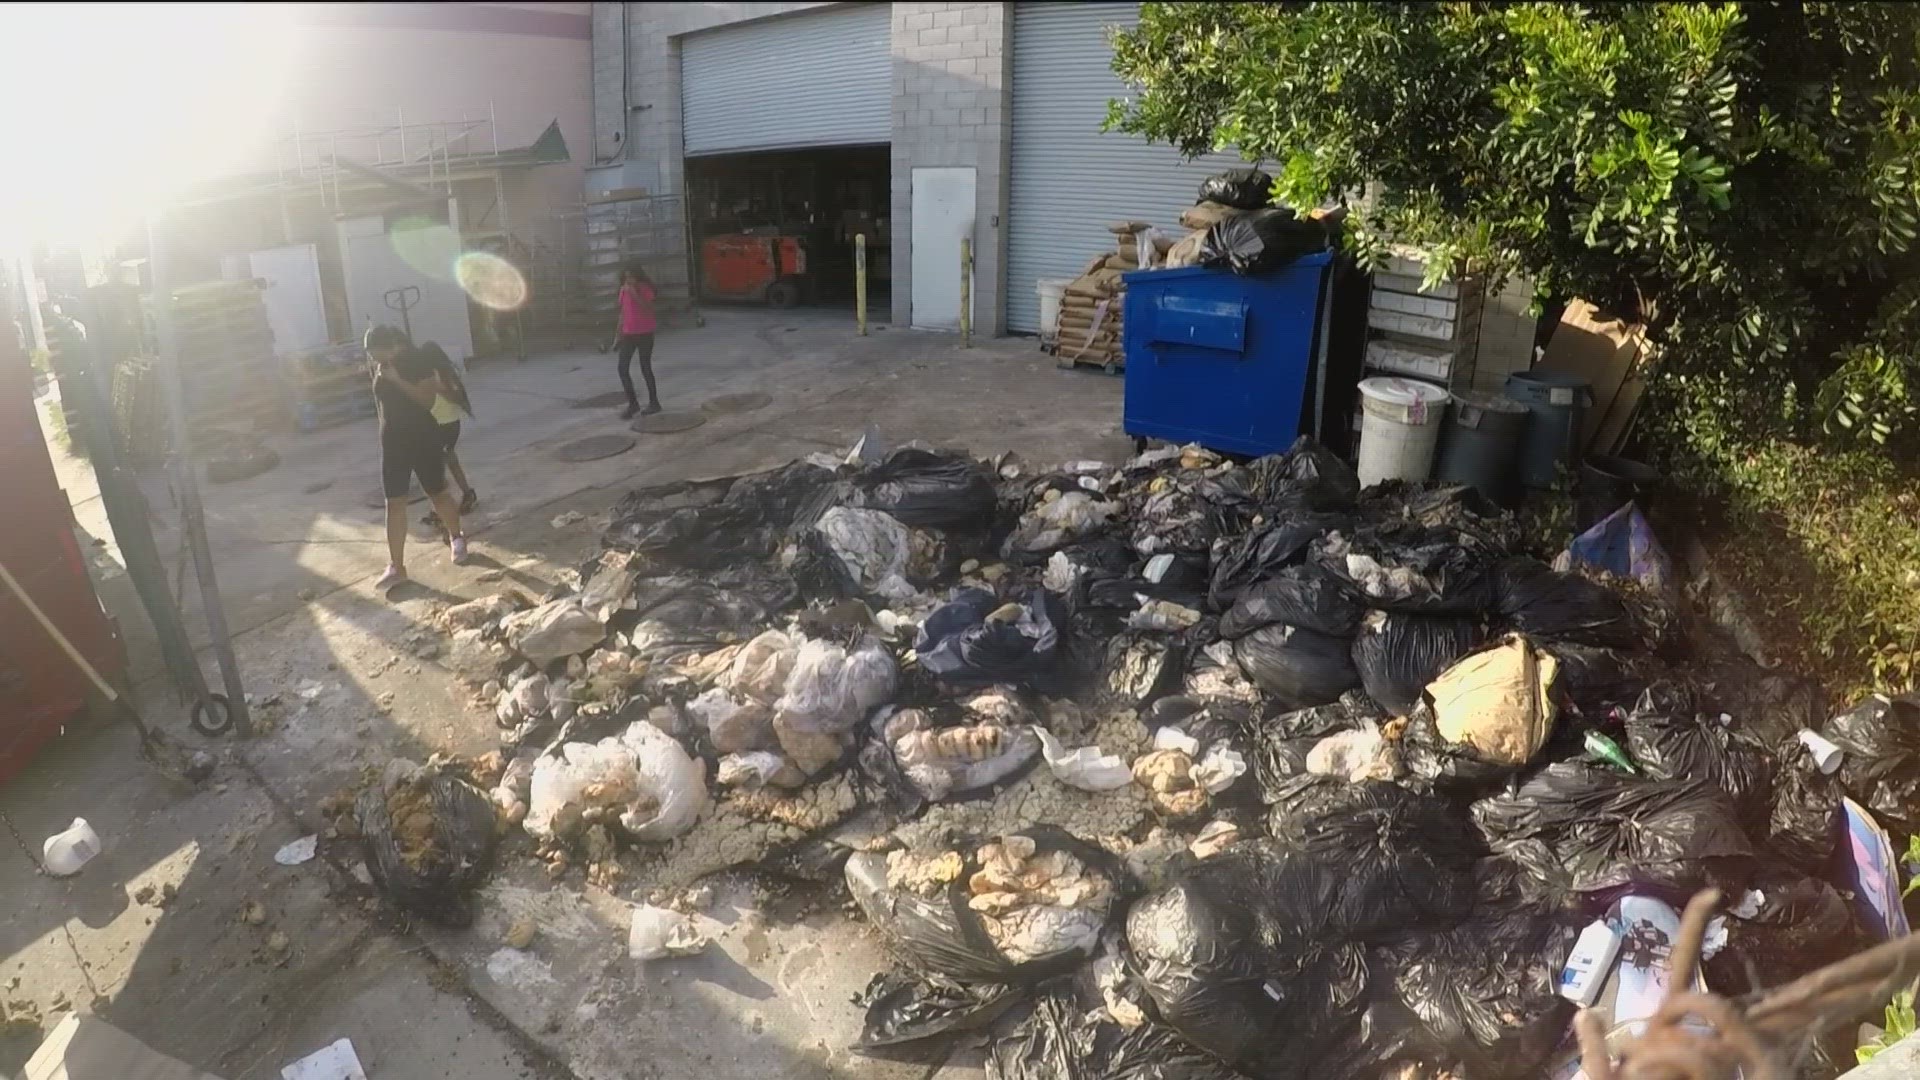 Families living on Boston Avenue feel sick after noticing a stench. They say it's coming from the bakery next door. The owner has been piling trash of rotten dough.